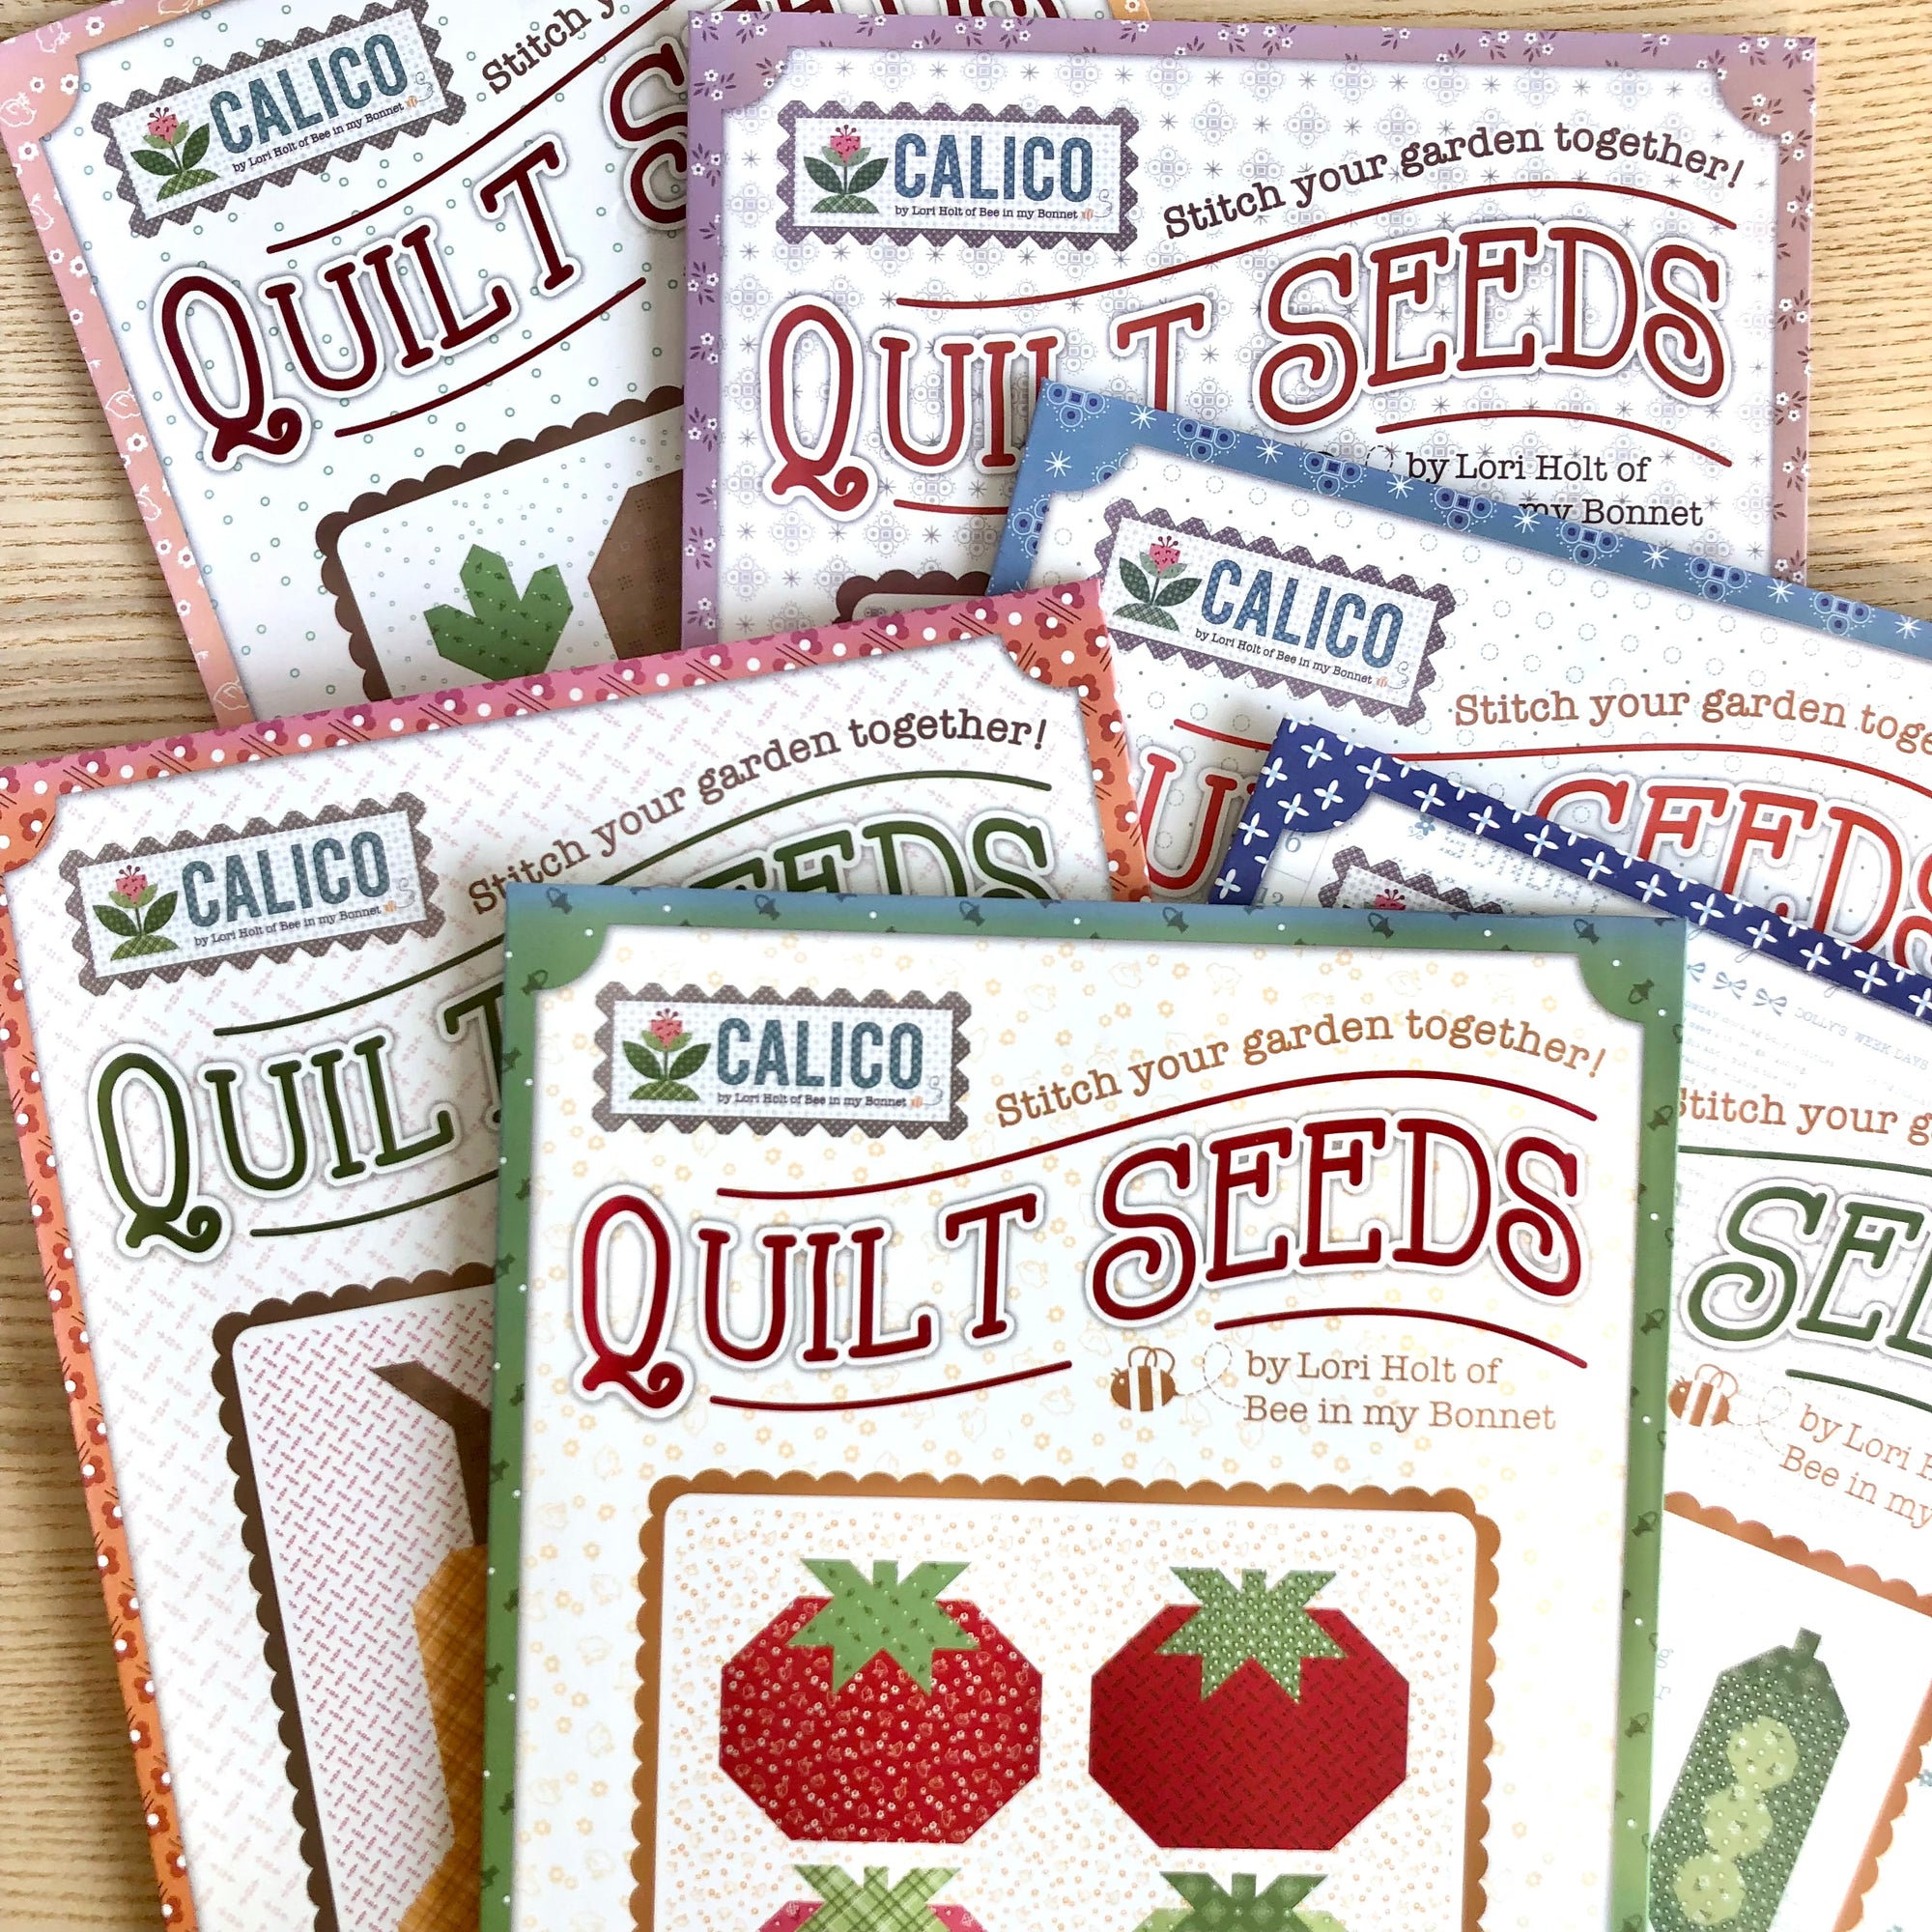 Quilt Seeds Block Pattern Calico Tomatoes